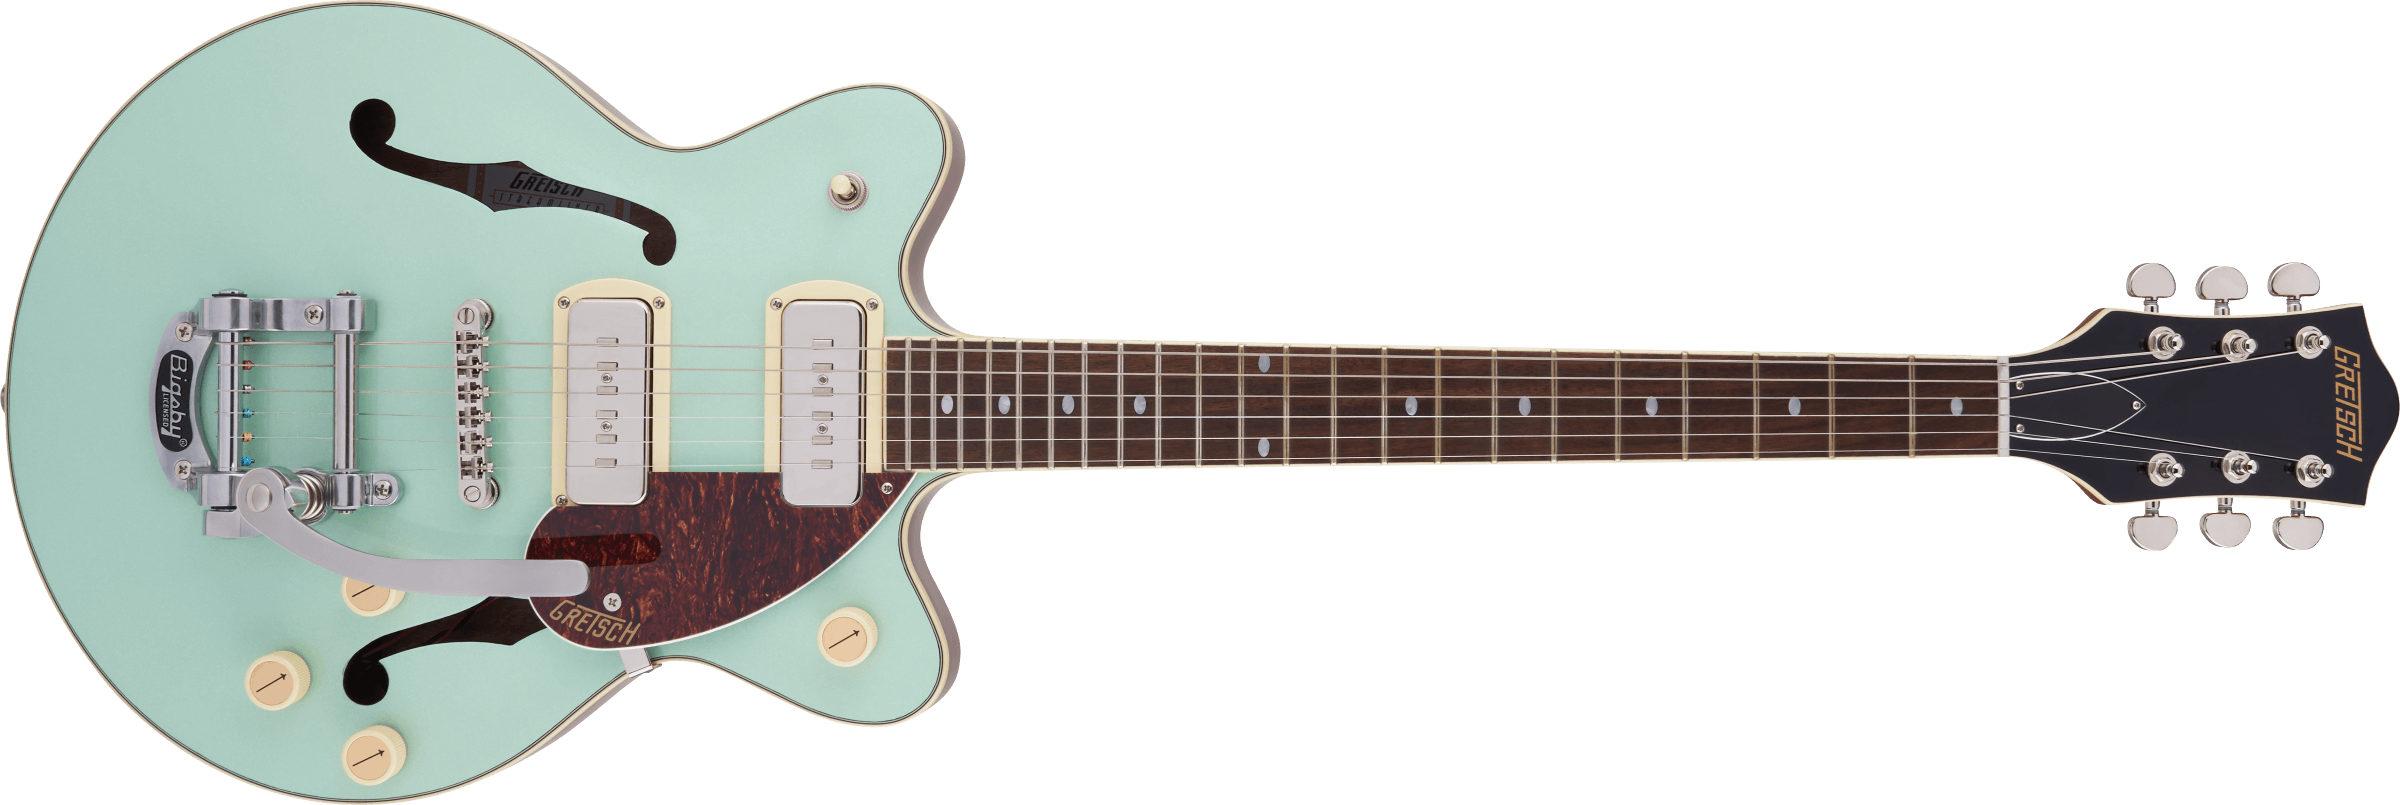 G2655T-P90 Streamliner™ Center Block Jr. Double-Cut P90 with Bigsby®, Laurel Fingerboard, Two-Tone Mint Metallic and Vintage Mahogany Stain